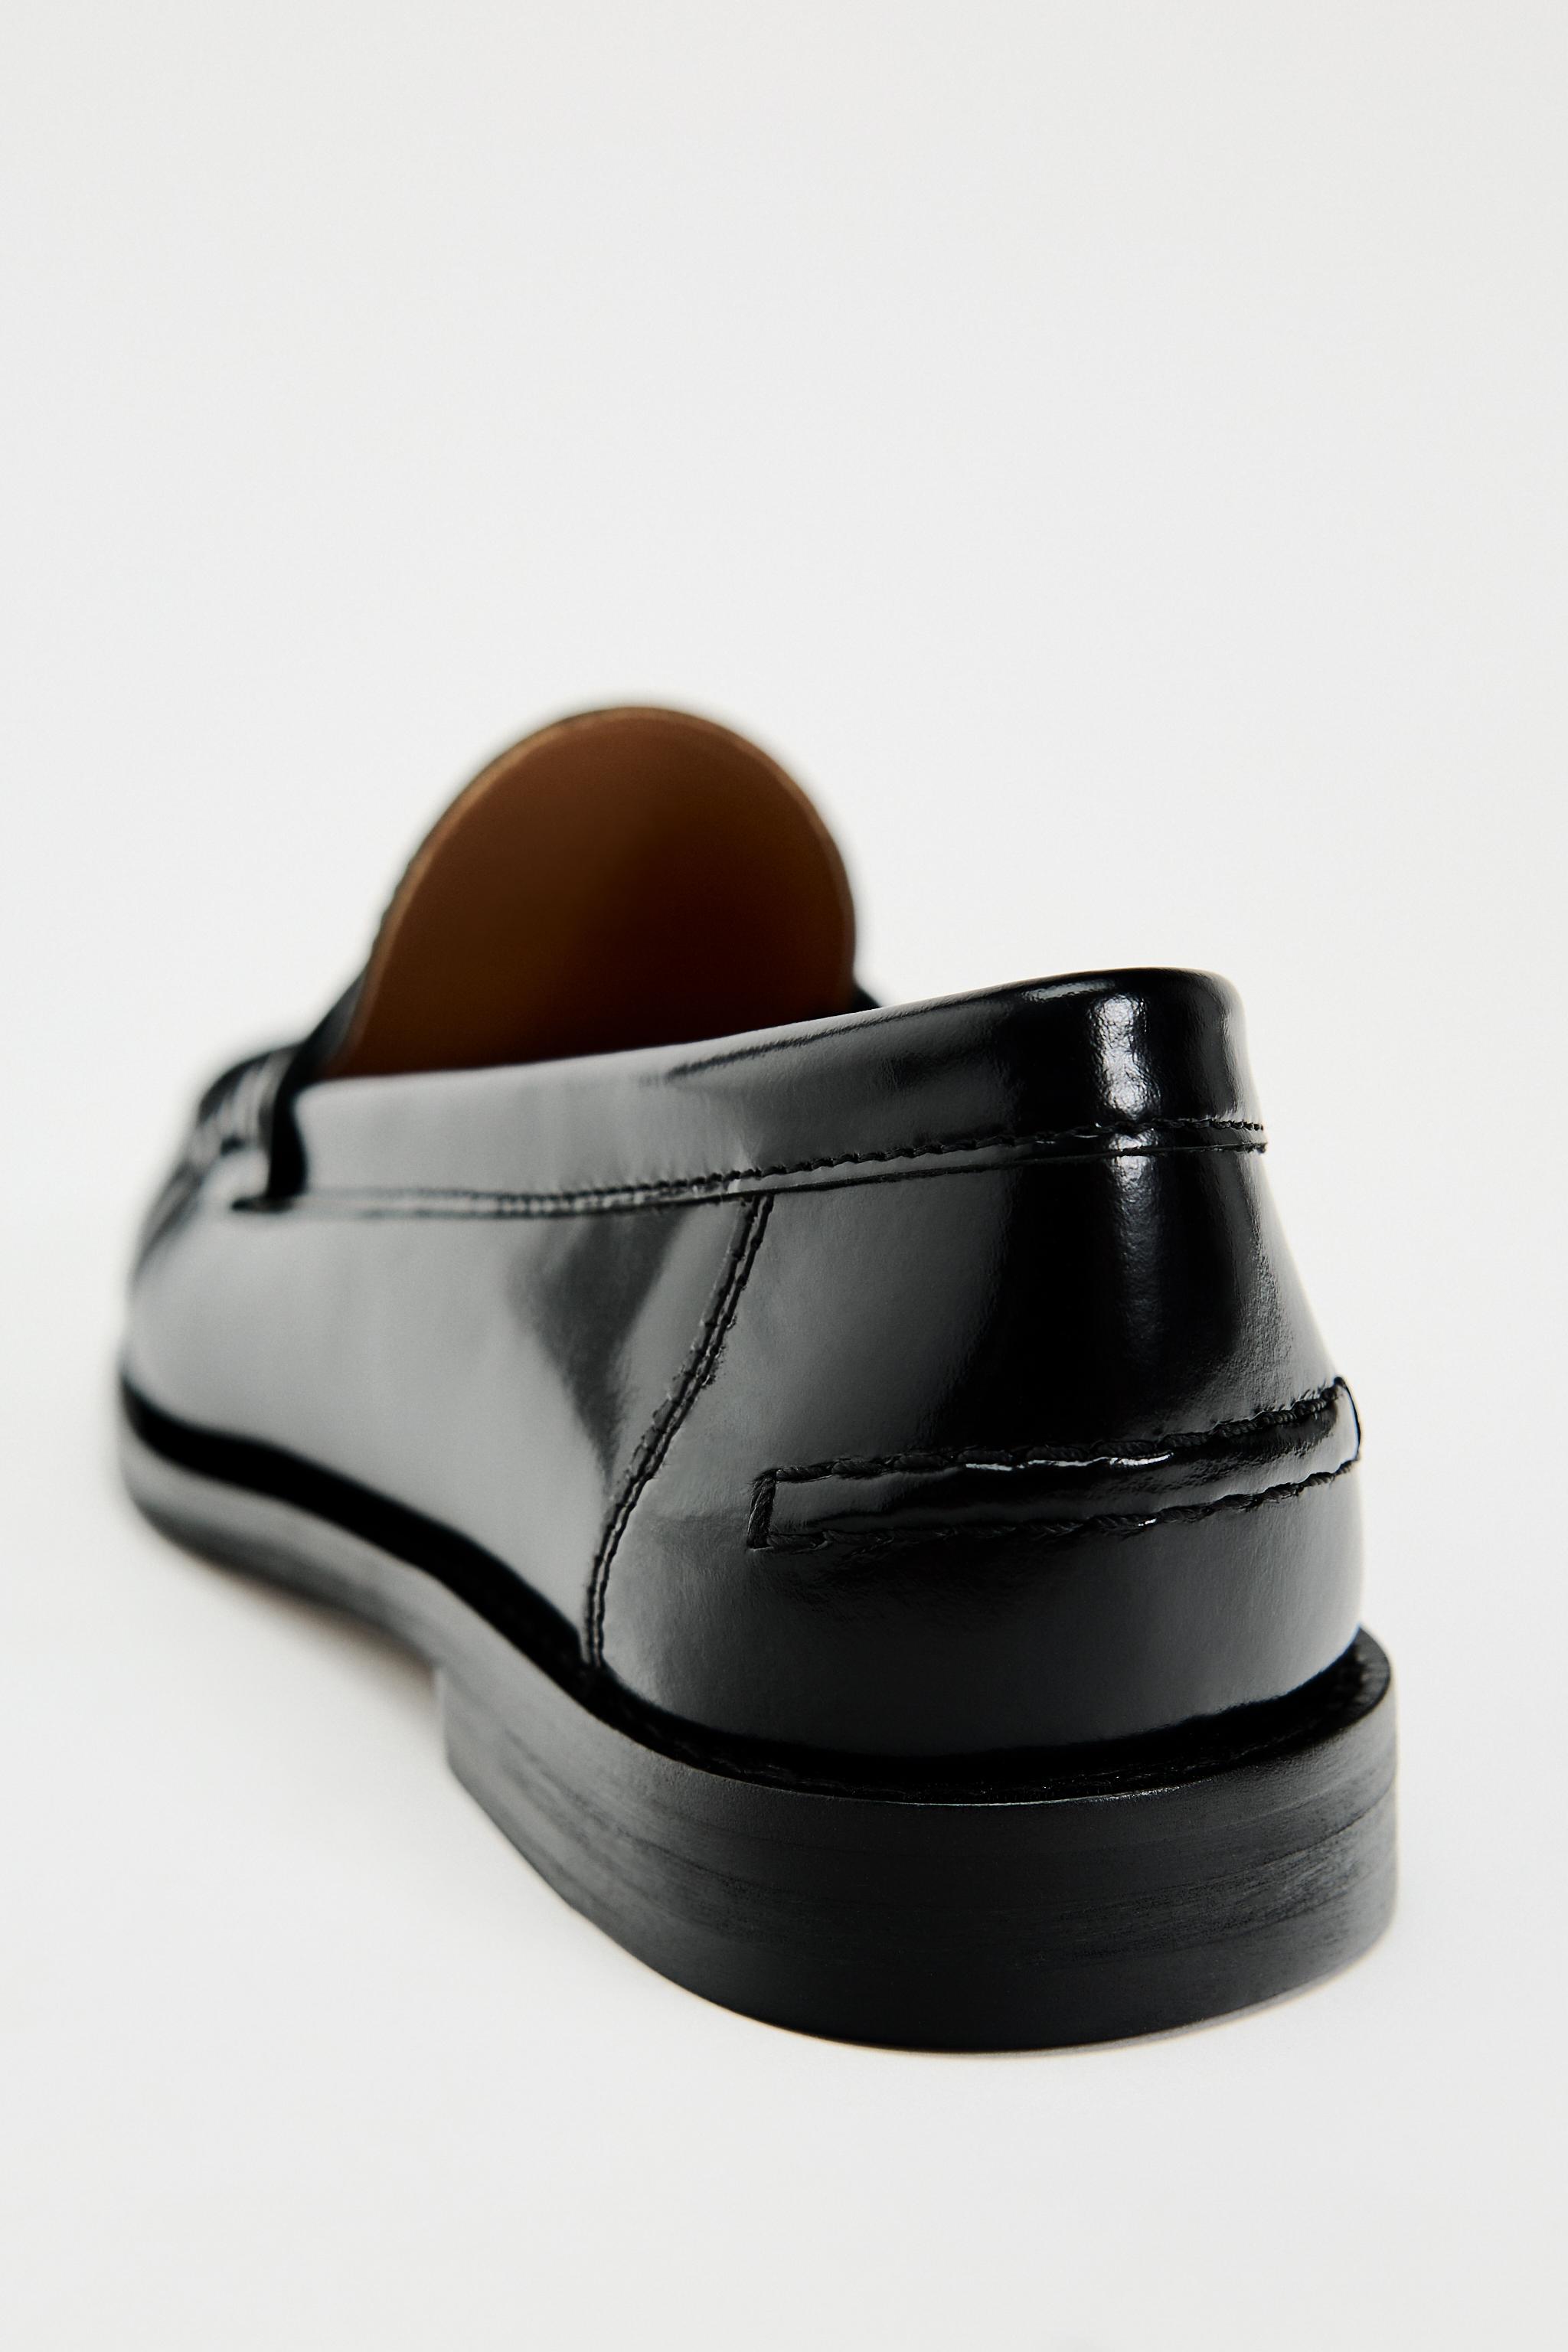 FLAT LEATHER LOAFERS - Brown